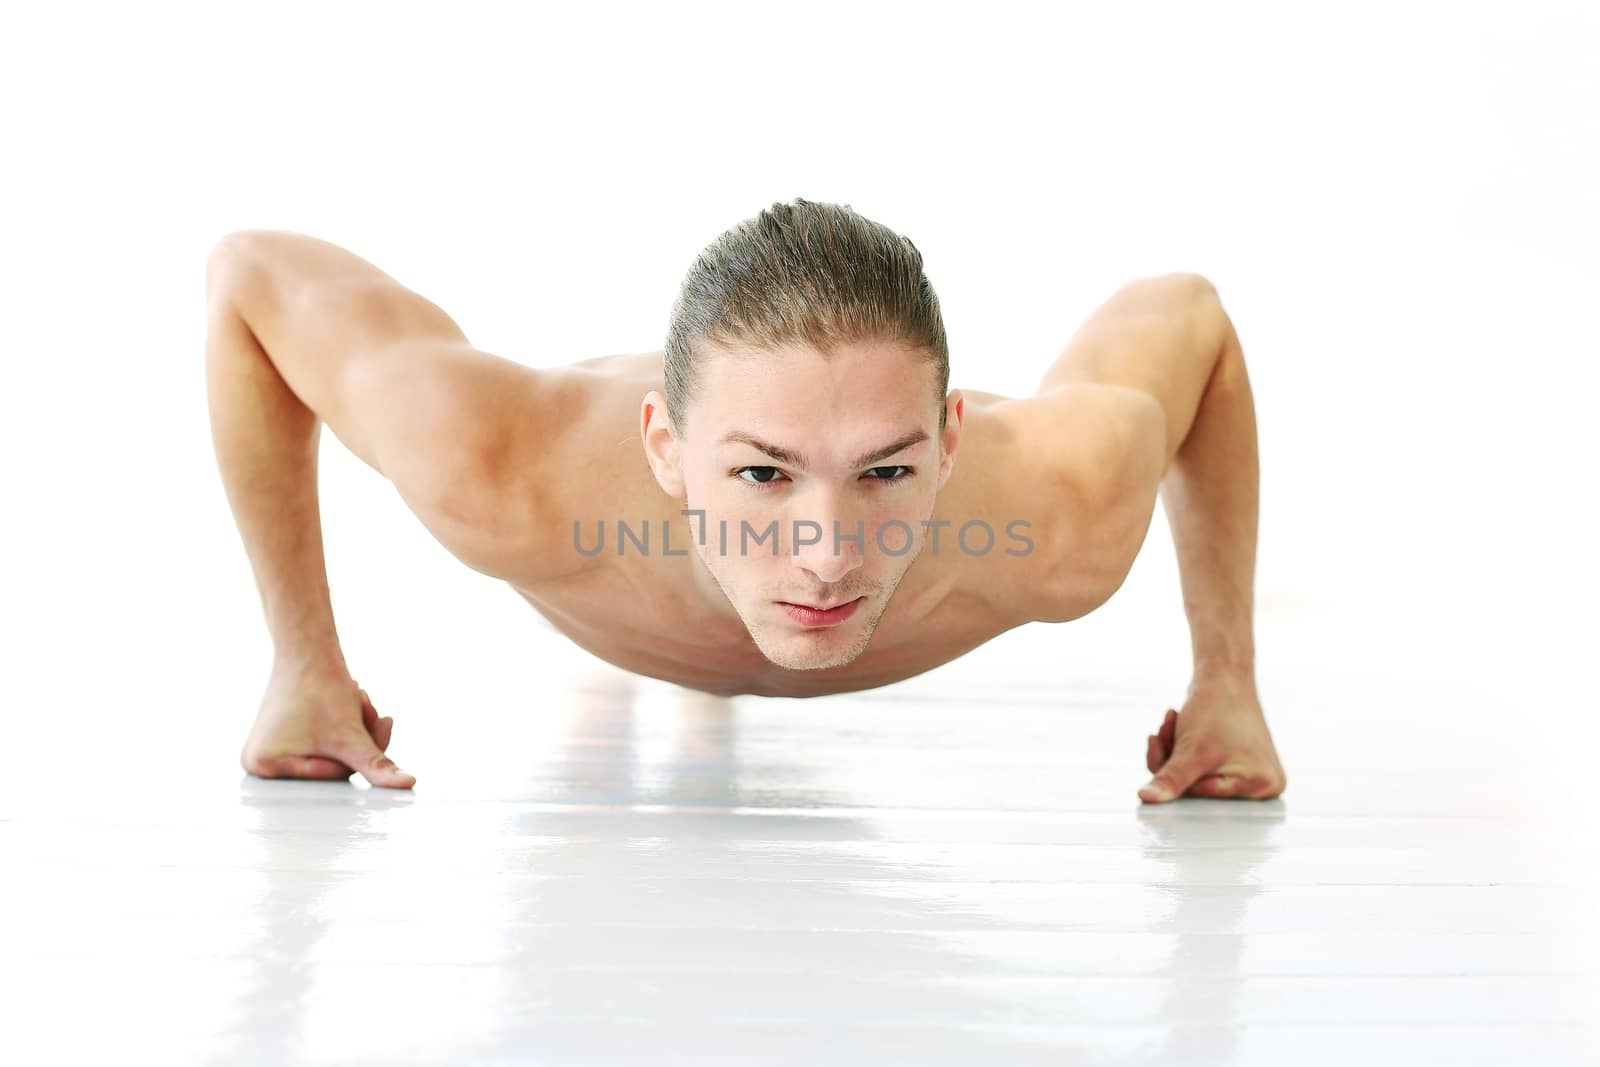 Portrait of a handsome shirtless man who is working out and posing over a white background